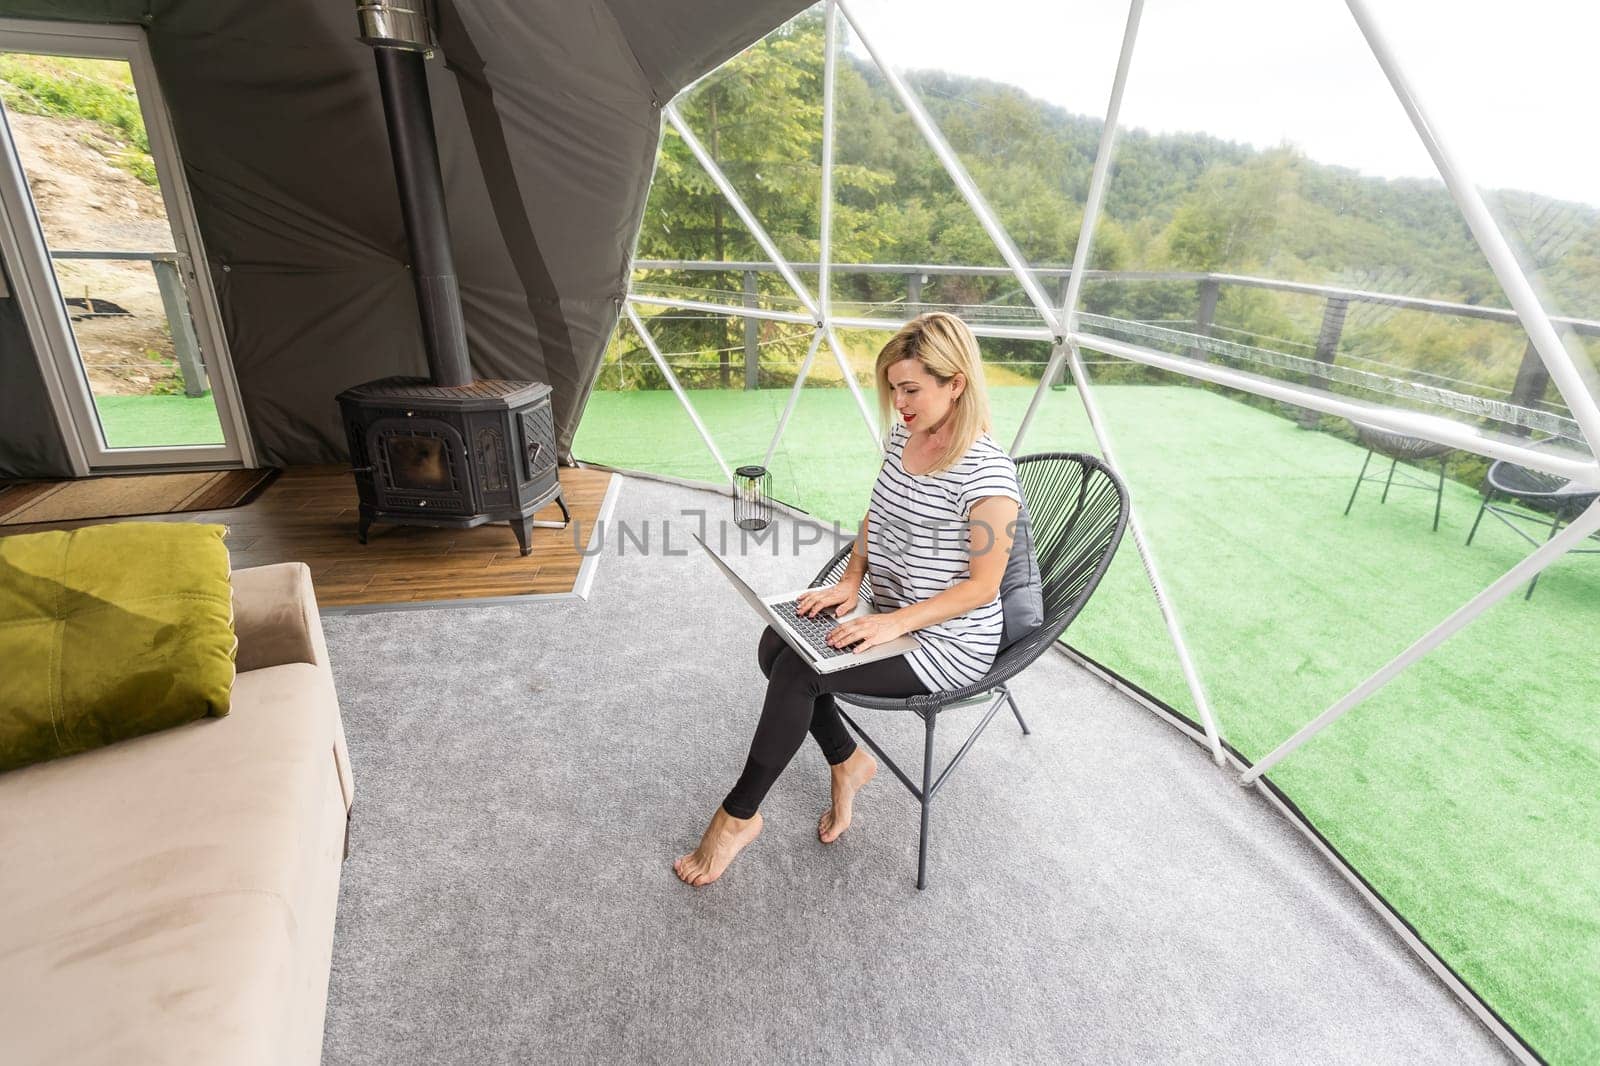 Transparent bubble tent at glamping, Lush forest around and interior. Woman with laptop.